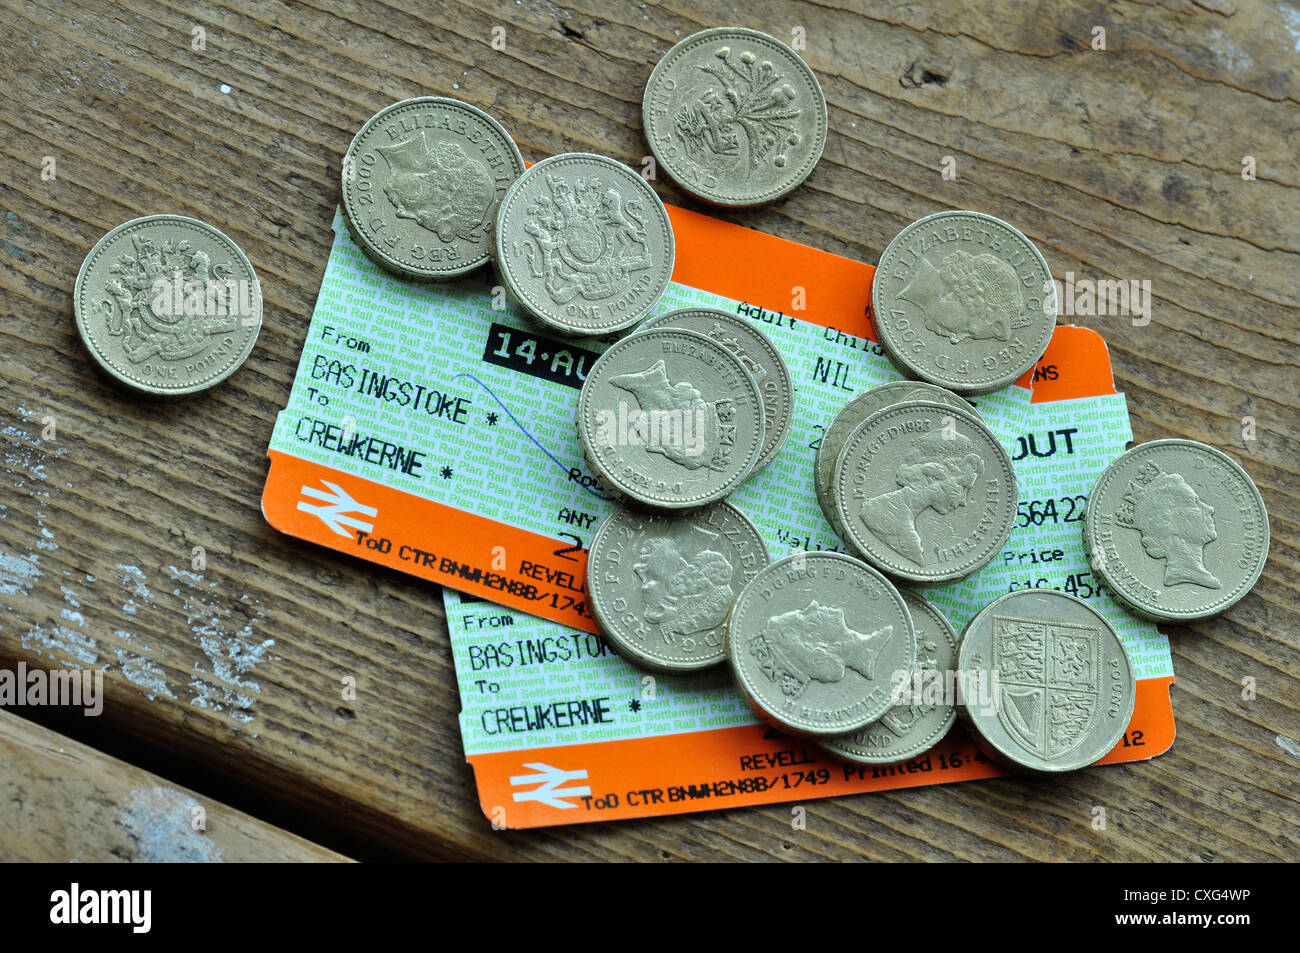 Railway tickets and pound coins UK Stock Photo